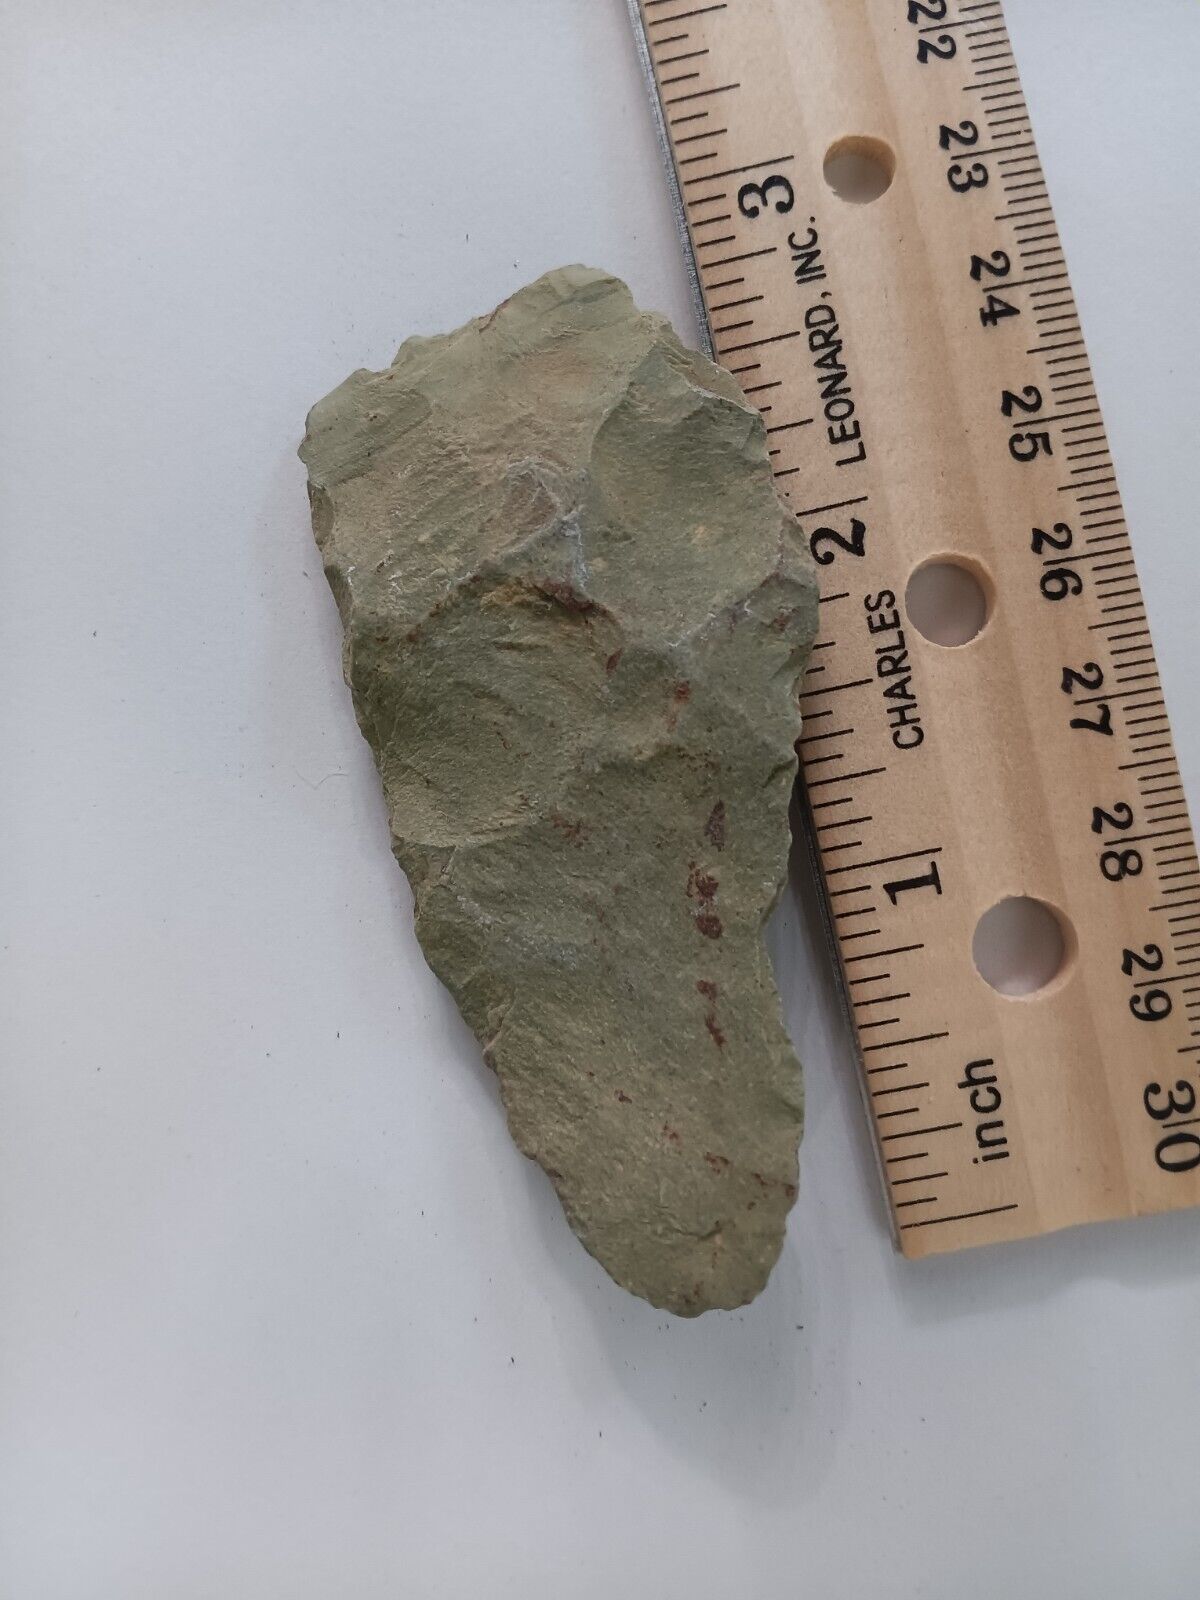 AUTHENTIC NATIVE AMERICAN INDIAN ARTIFACT FOUND, EASTERN N.C.--- CCC/36